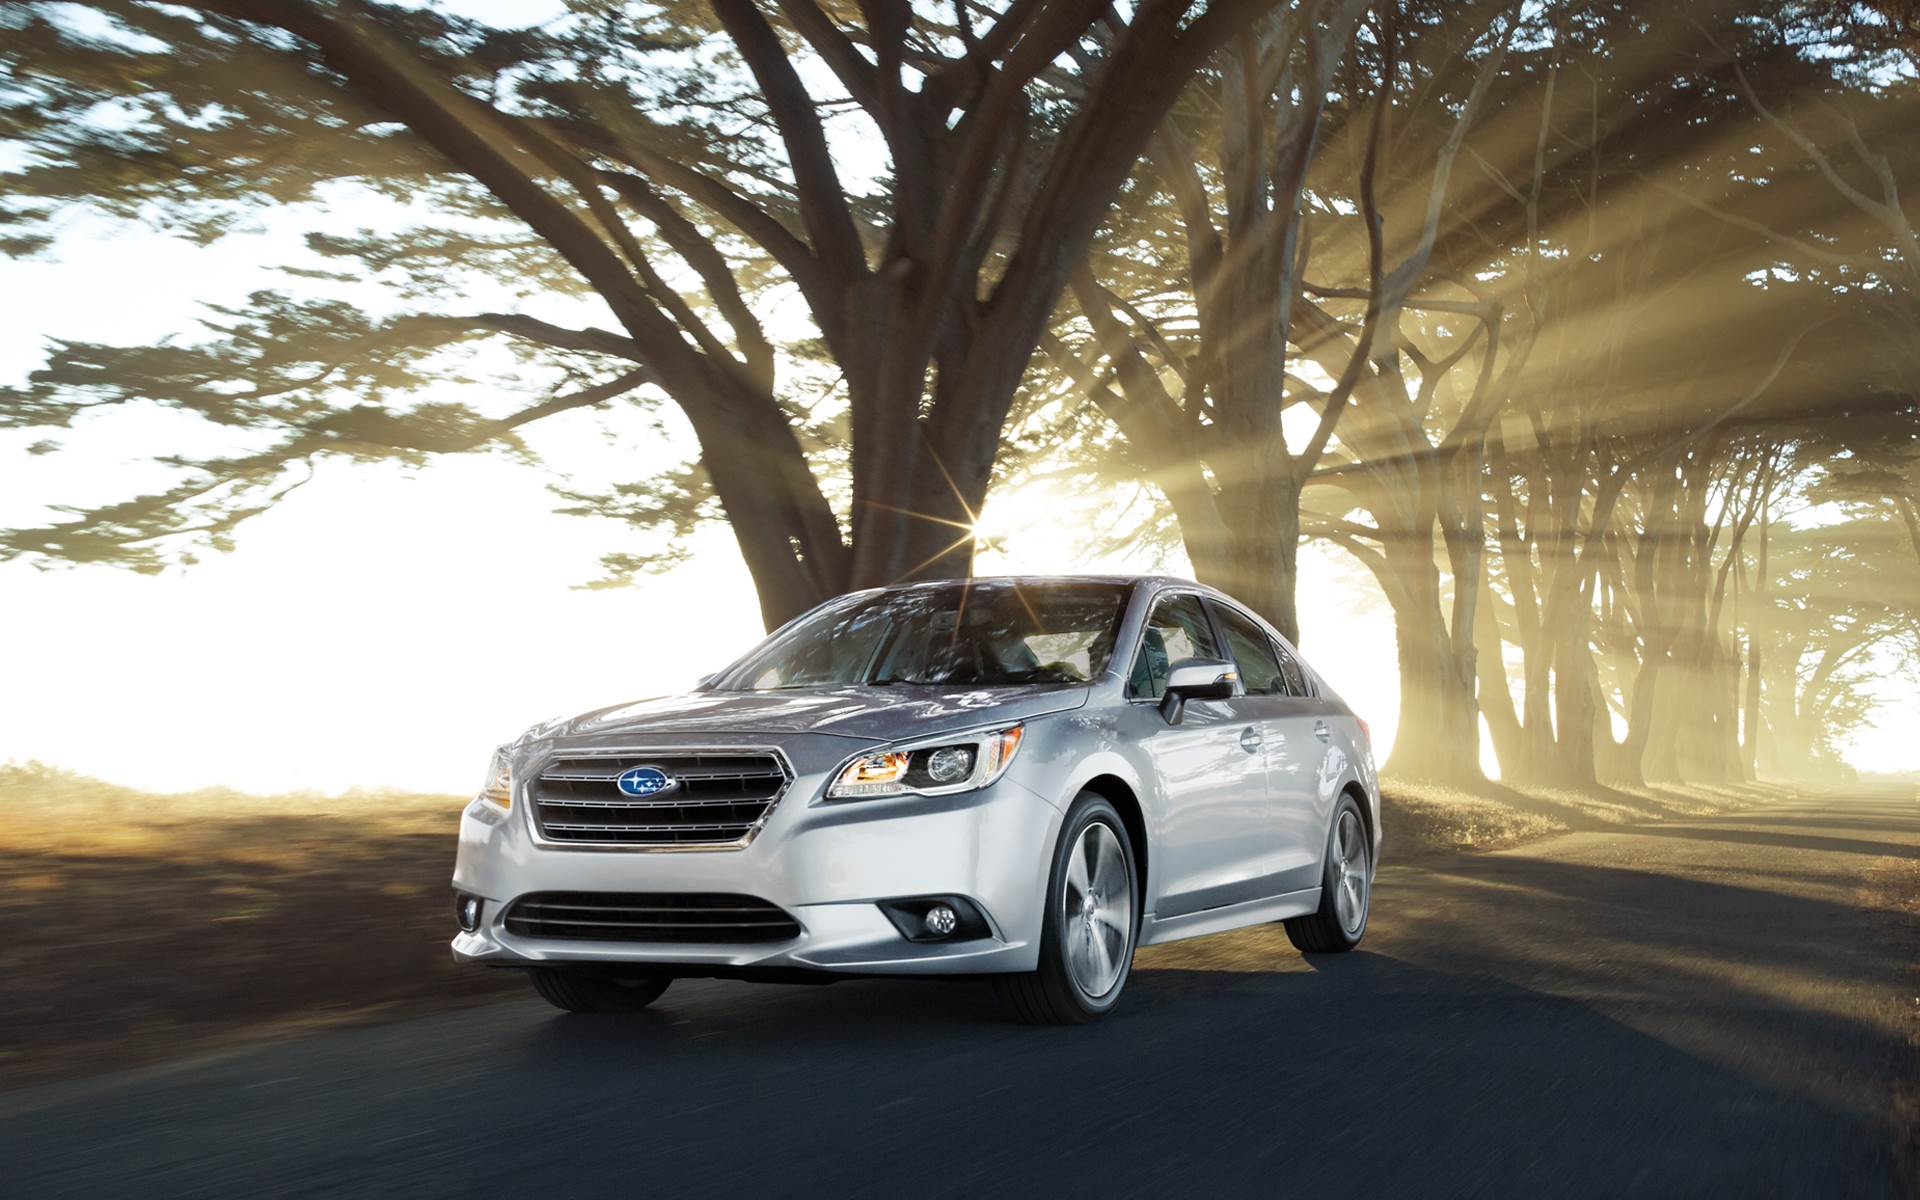 How many airbags in 2017 SUBARU LEGACY. Safety features and score